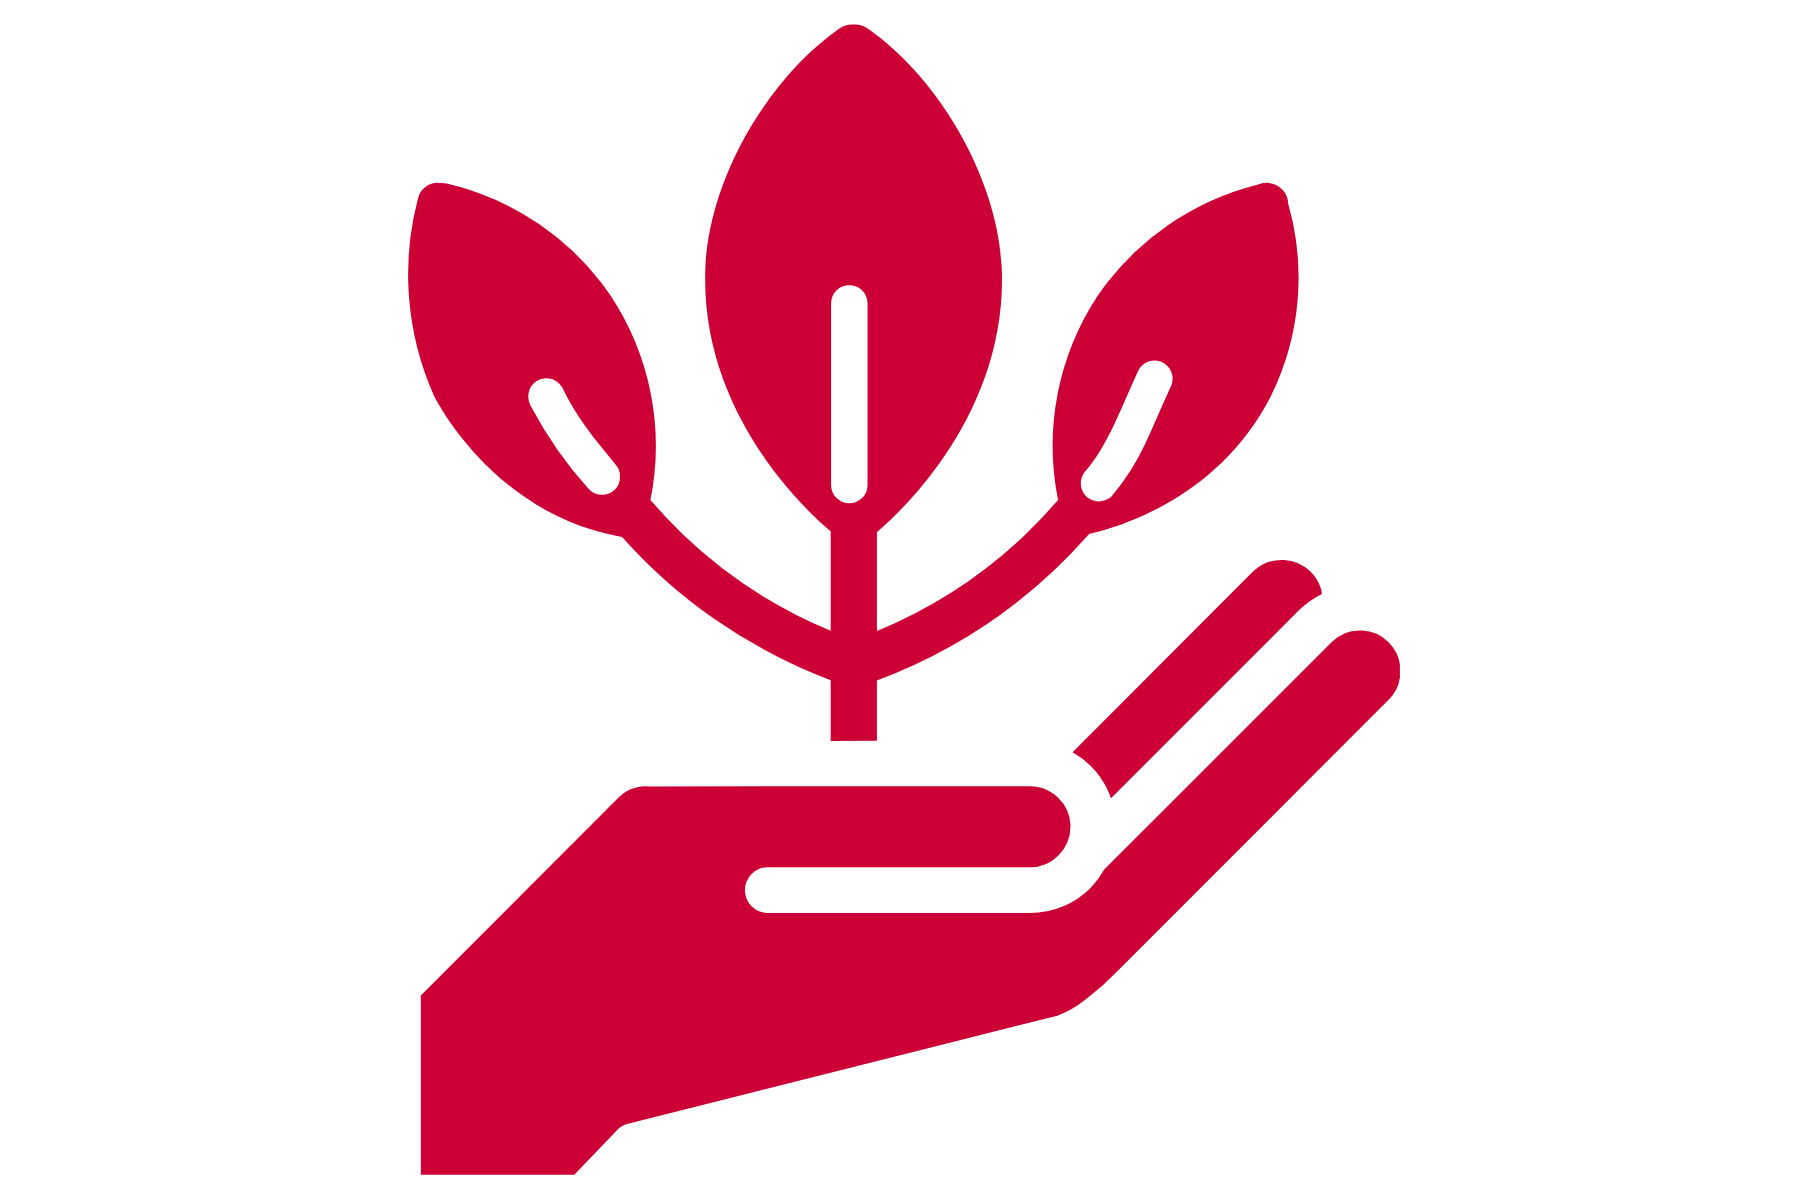 Red icon of a hand holding a small plant